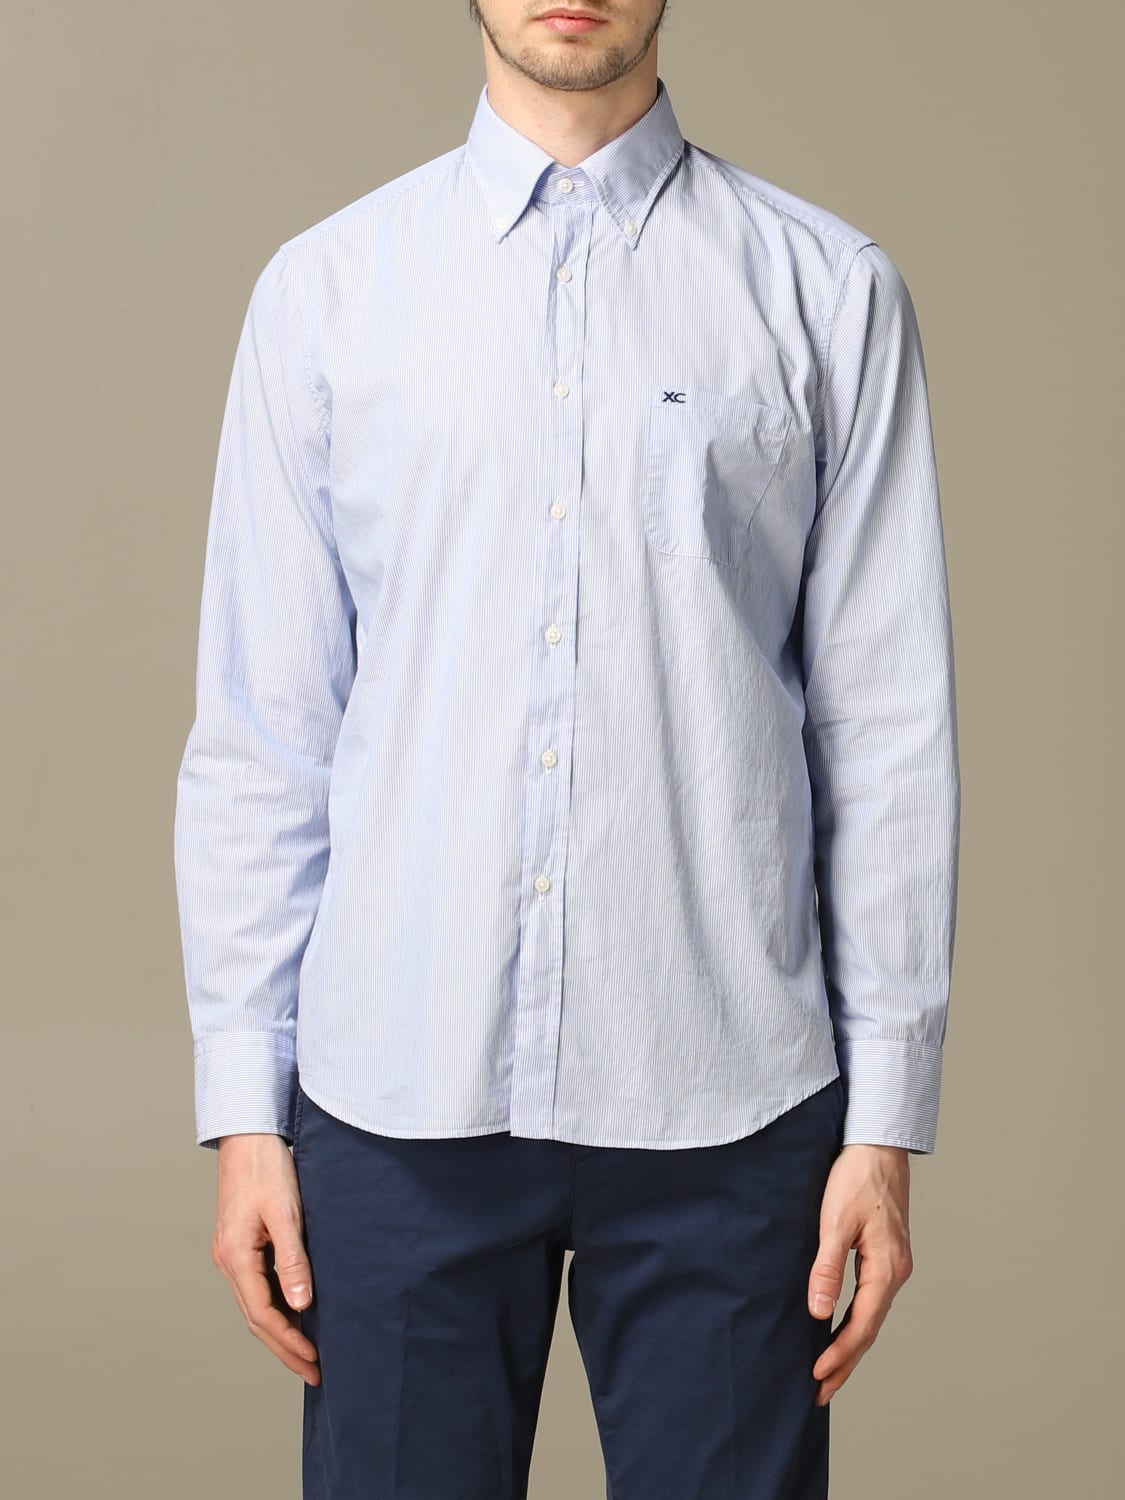 Xc -  shirt in micro-check washed cotton